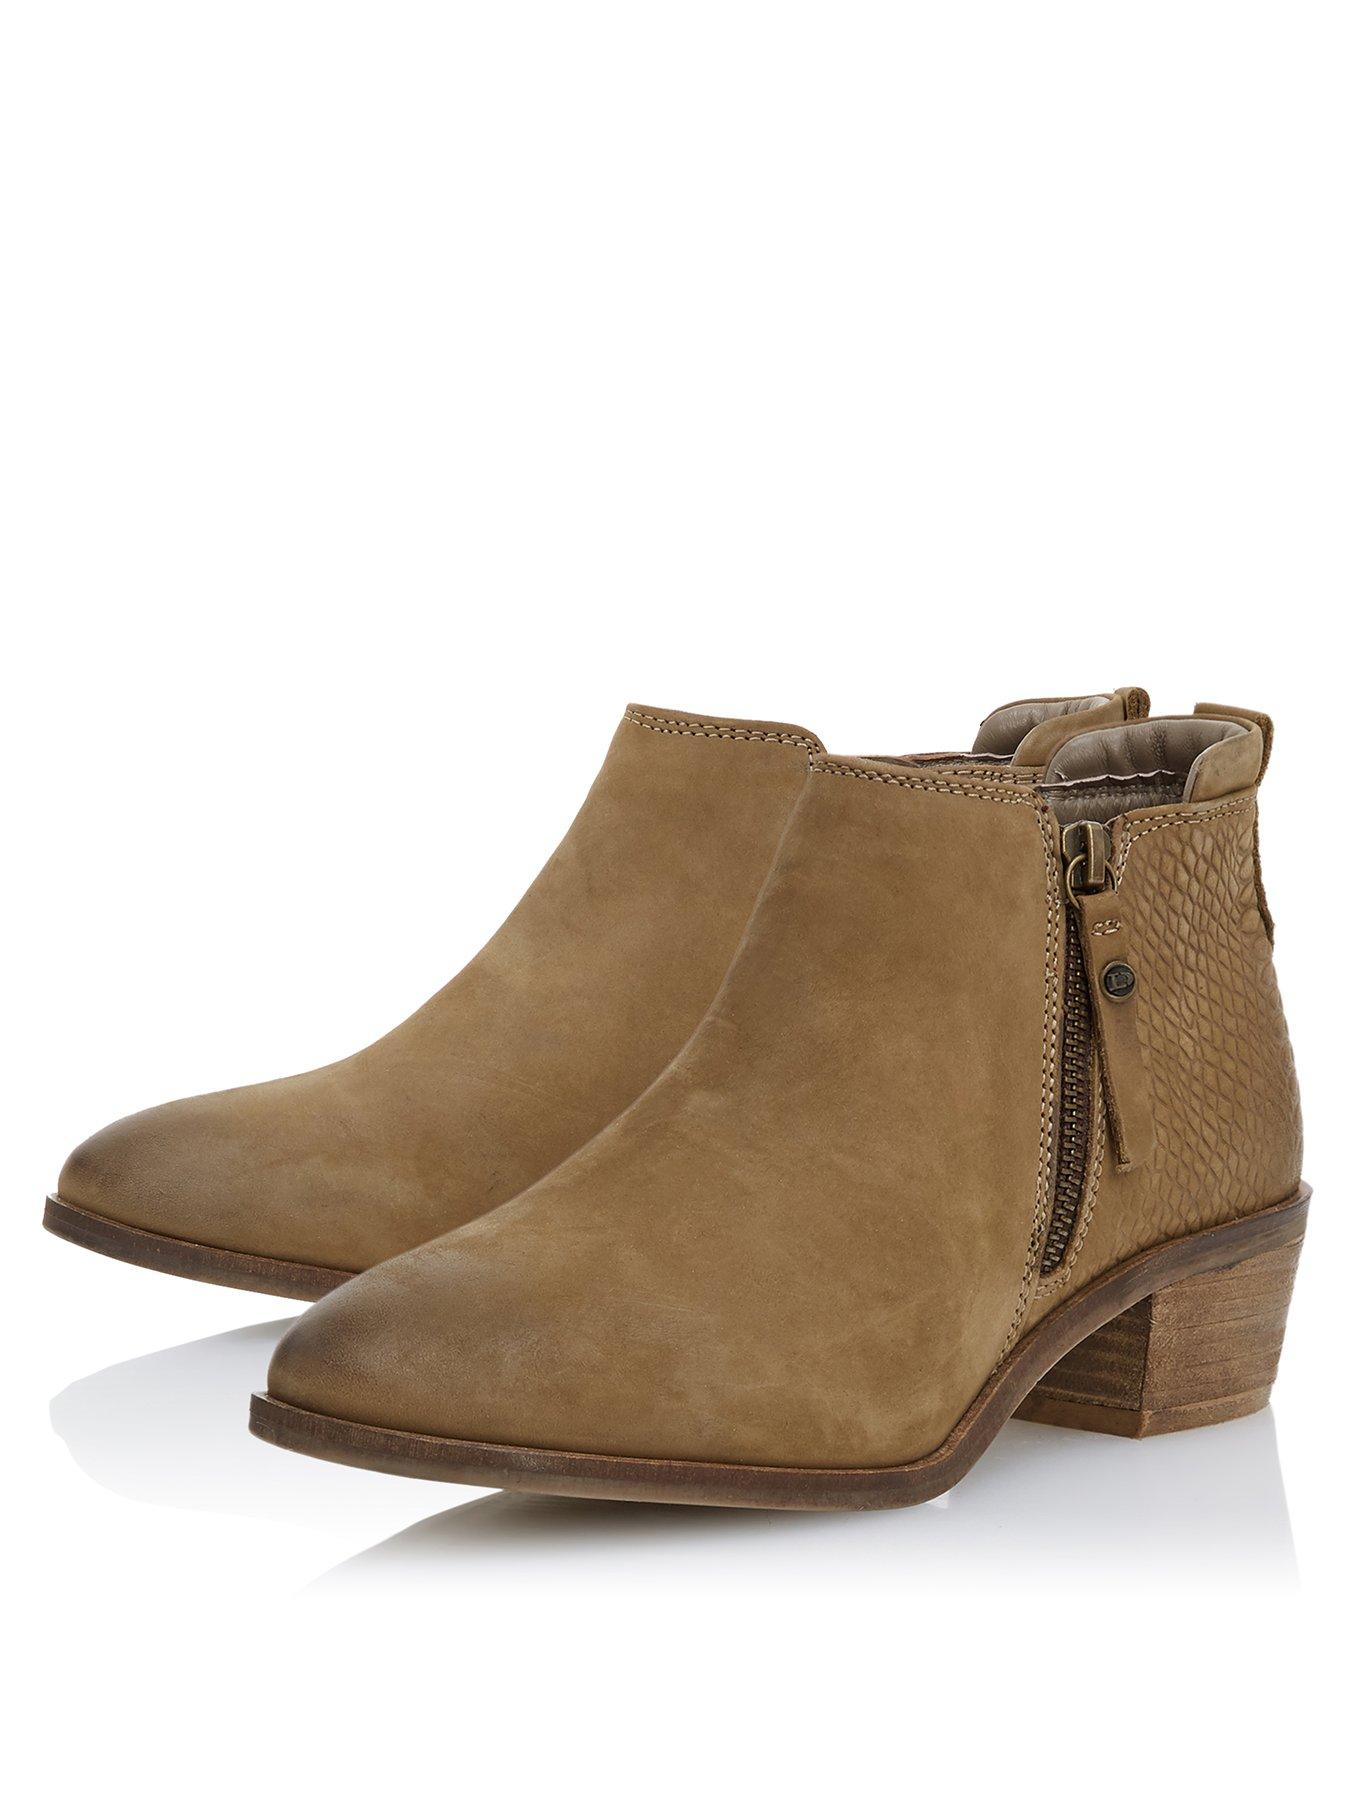 dune ankle boots uk